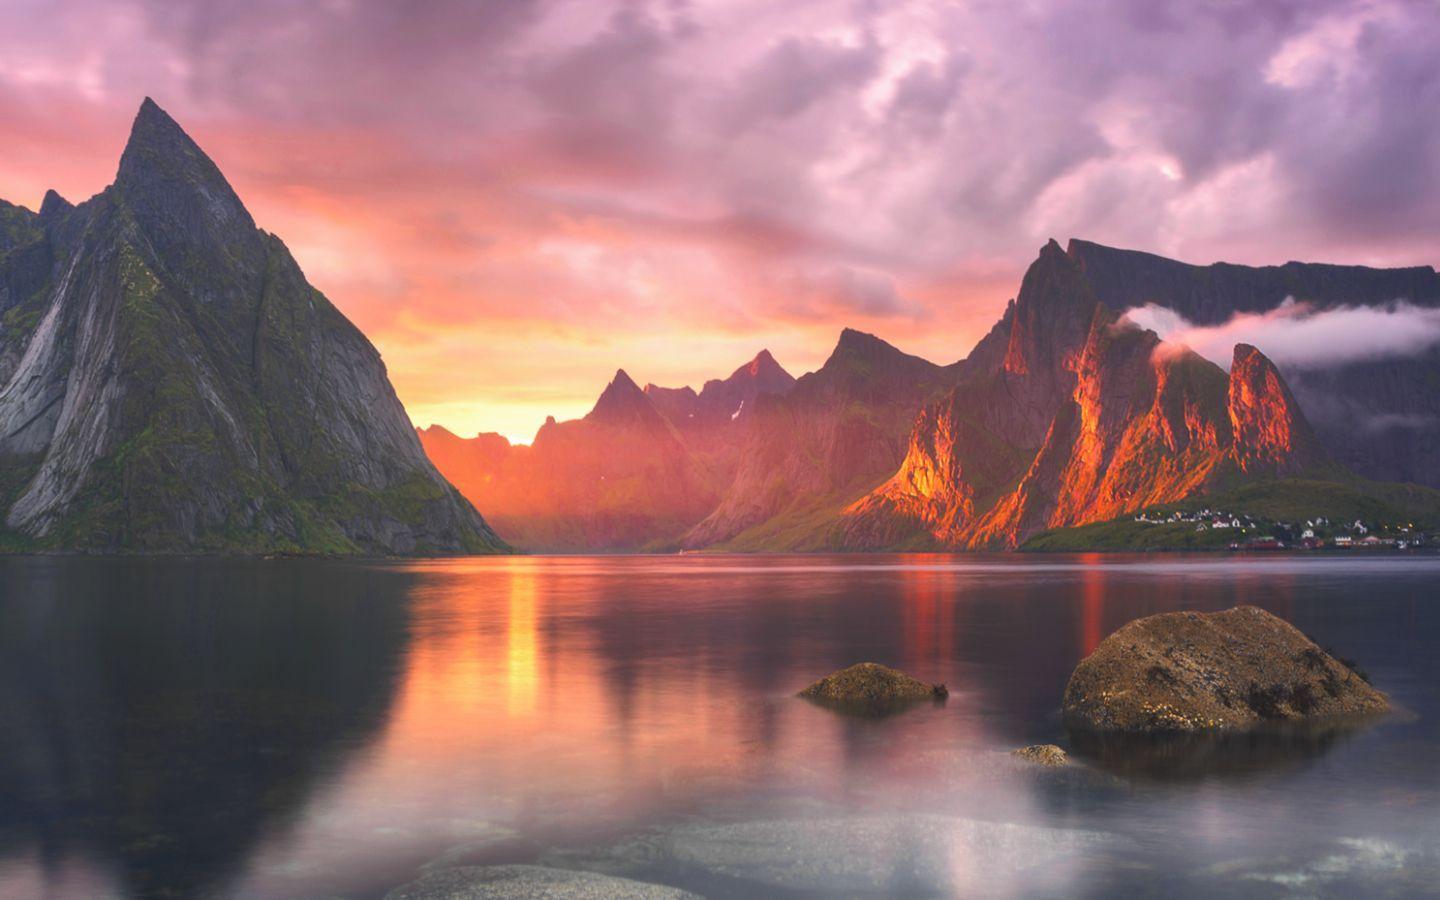 Here are all of OS X Yosemite's beautiful new wallpapers